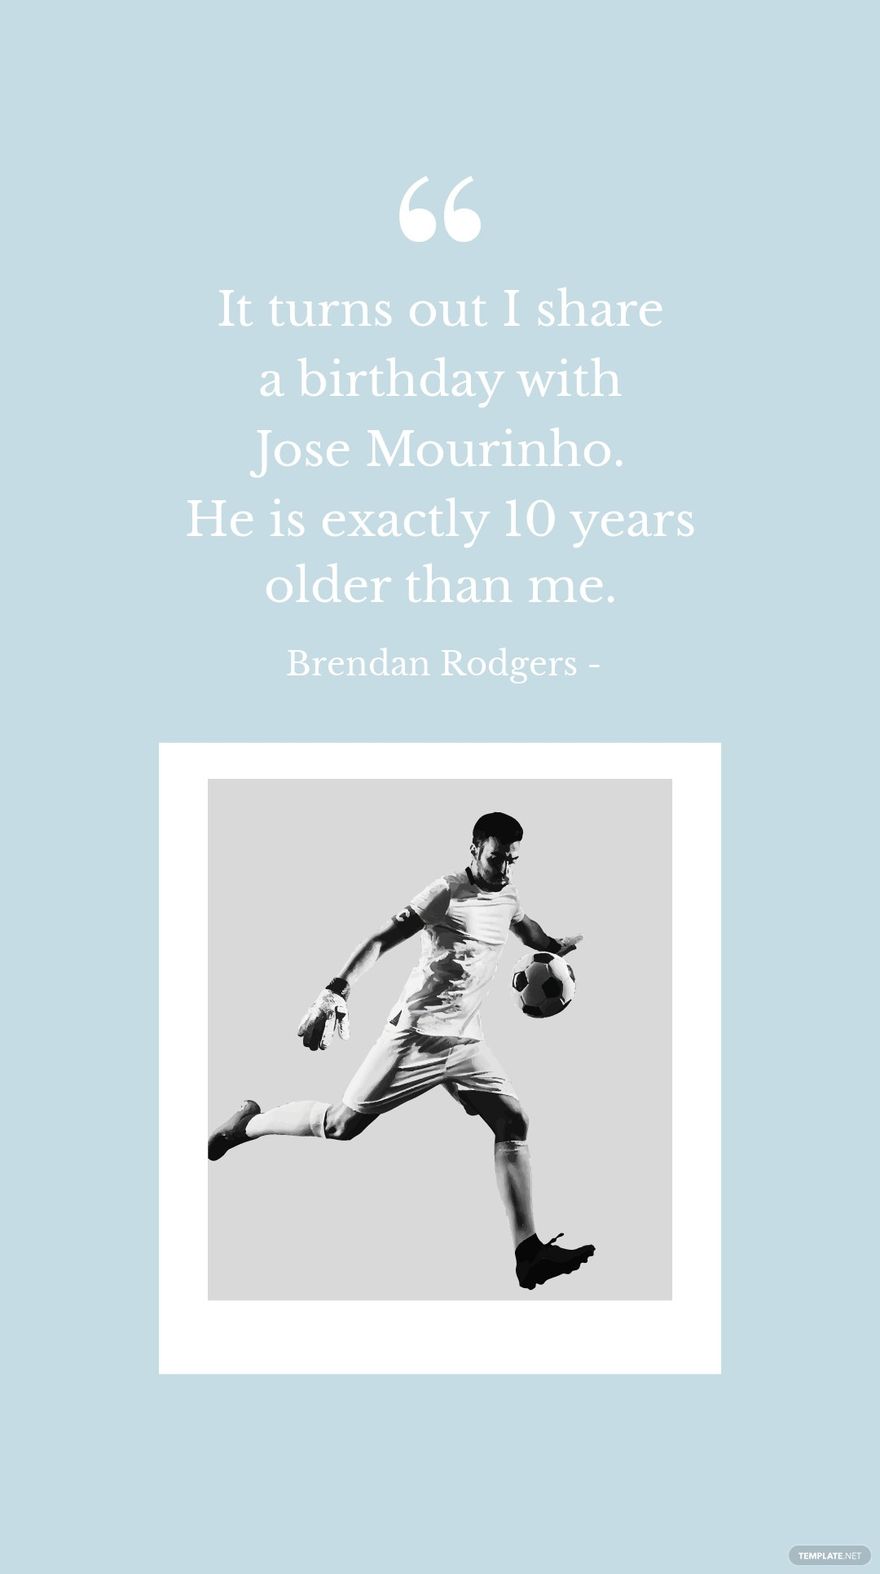 Free Brendan Rodgers - It turns out I share a birthday with Jose Mourinho. He is exactly 10 years older than me.